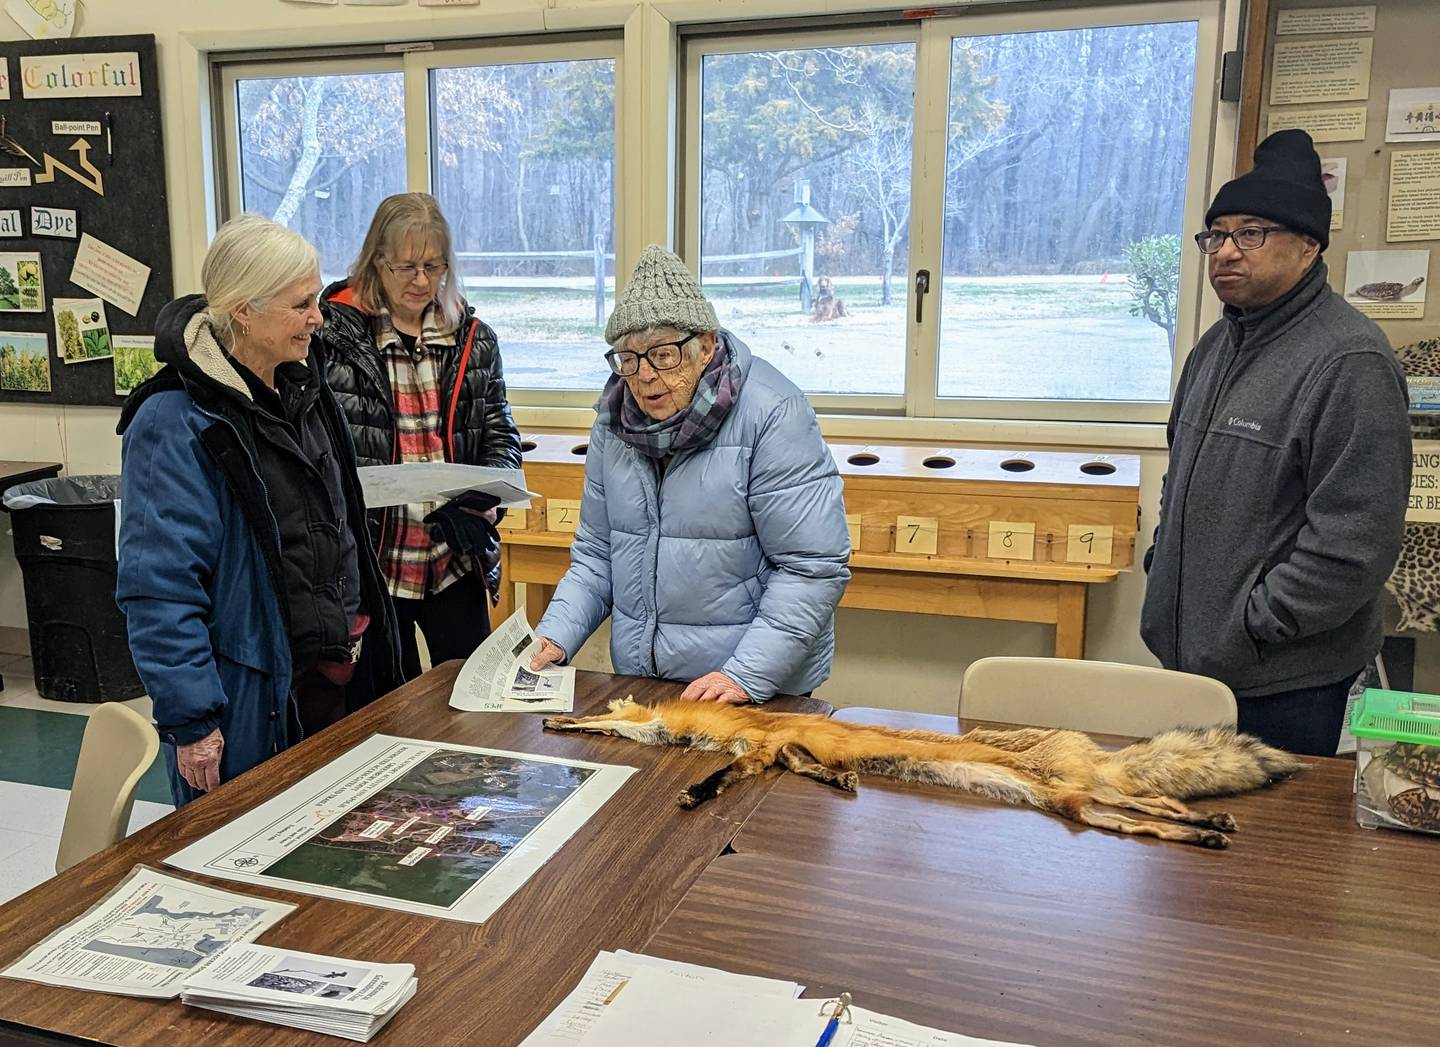 Agnes Lorentzen, center, visted the Greenbury Point Nature Center to demonstrate opposition to a golf course discussed for the site. The 100-year-old Virginia woman is the mother of the late founder of the center, Tina Lorentzen Carlson.